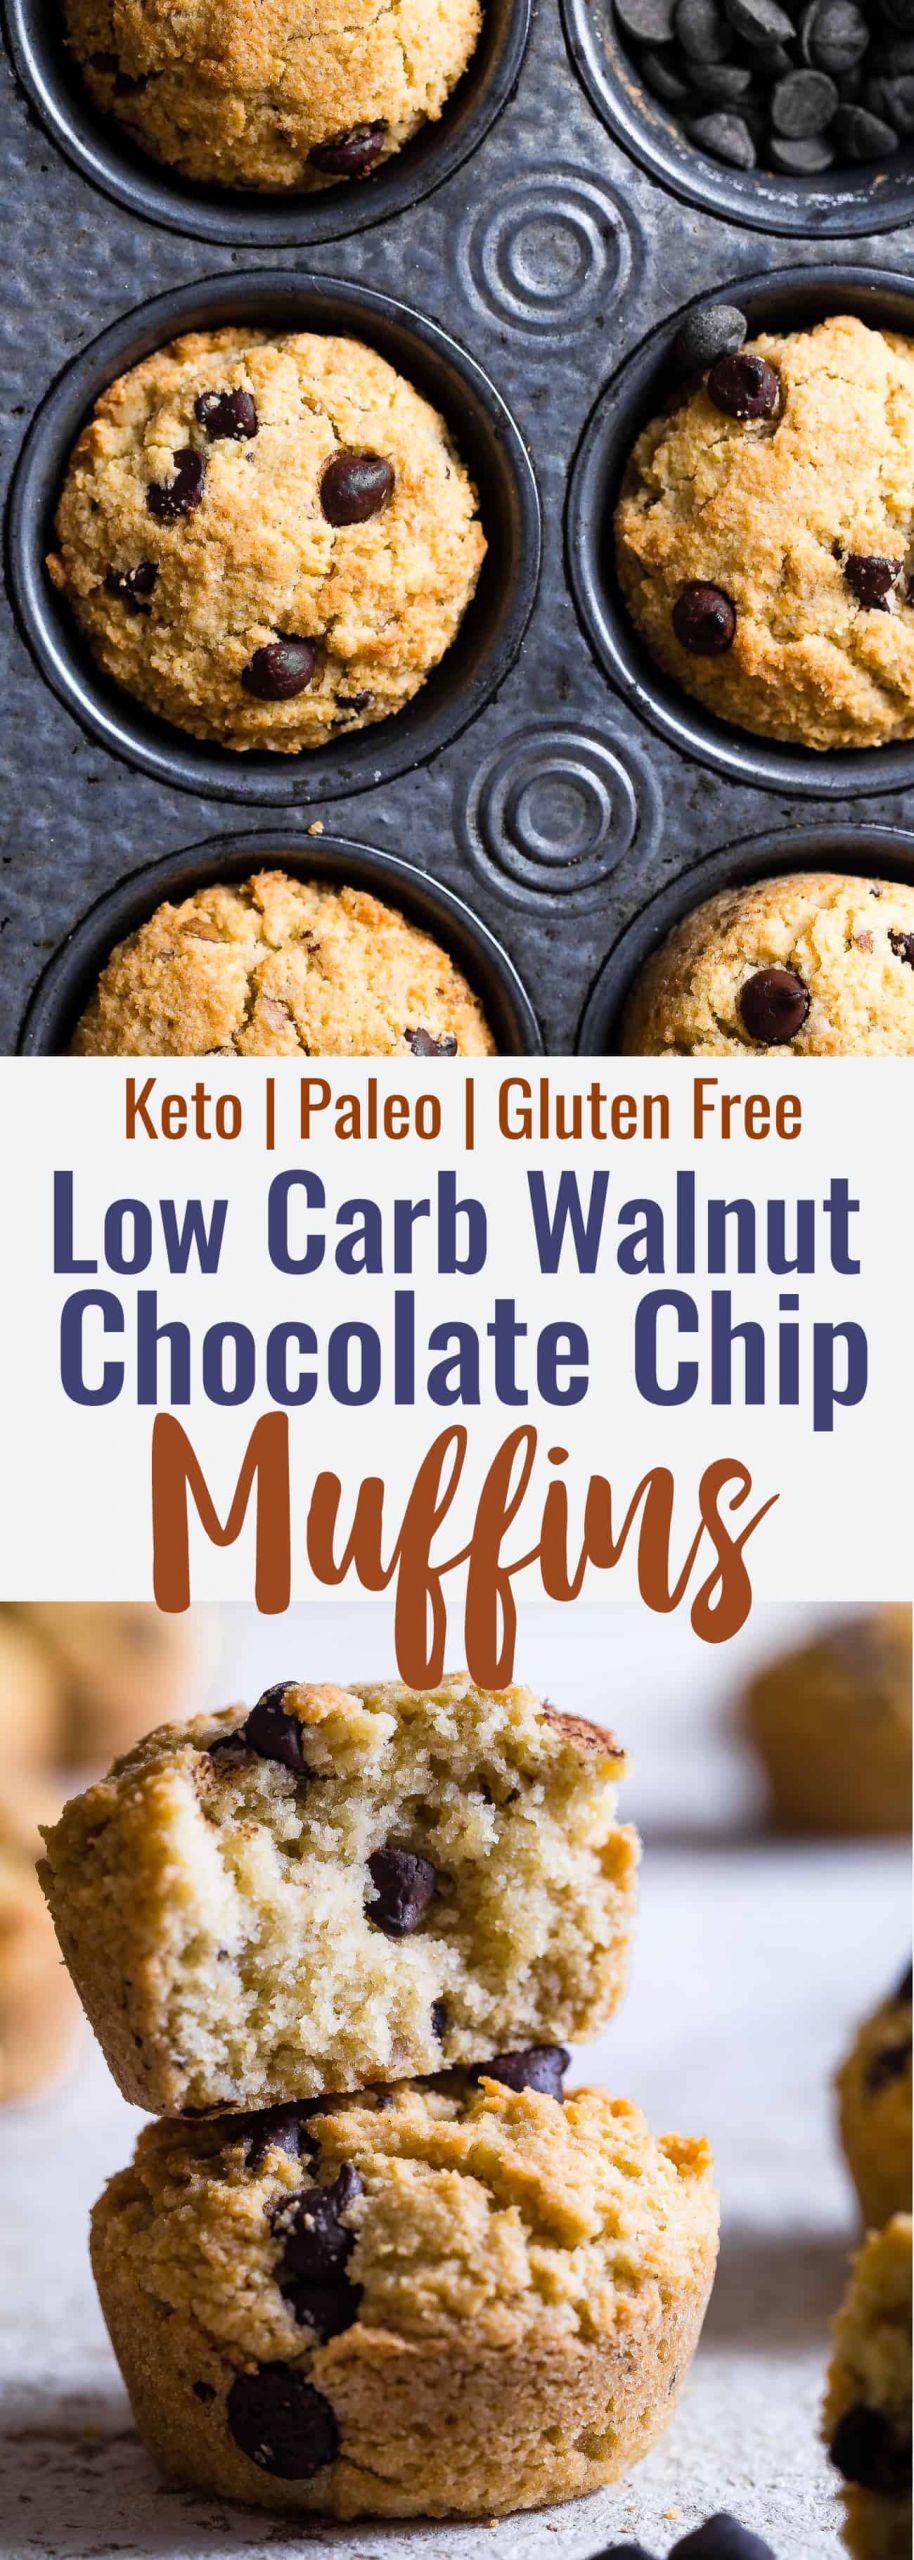 Dairy Free Keto Muffins
 Chocolate Chip Keto Low carb Muffins with Almond Flour